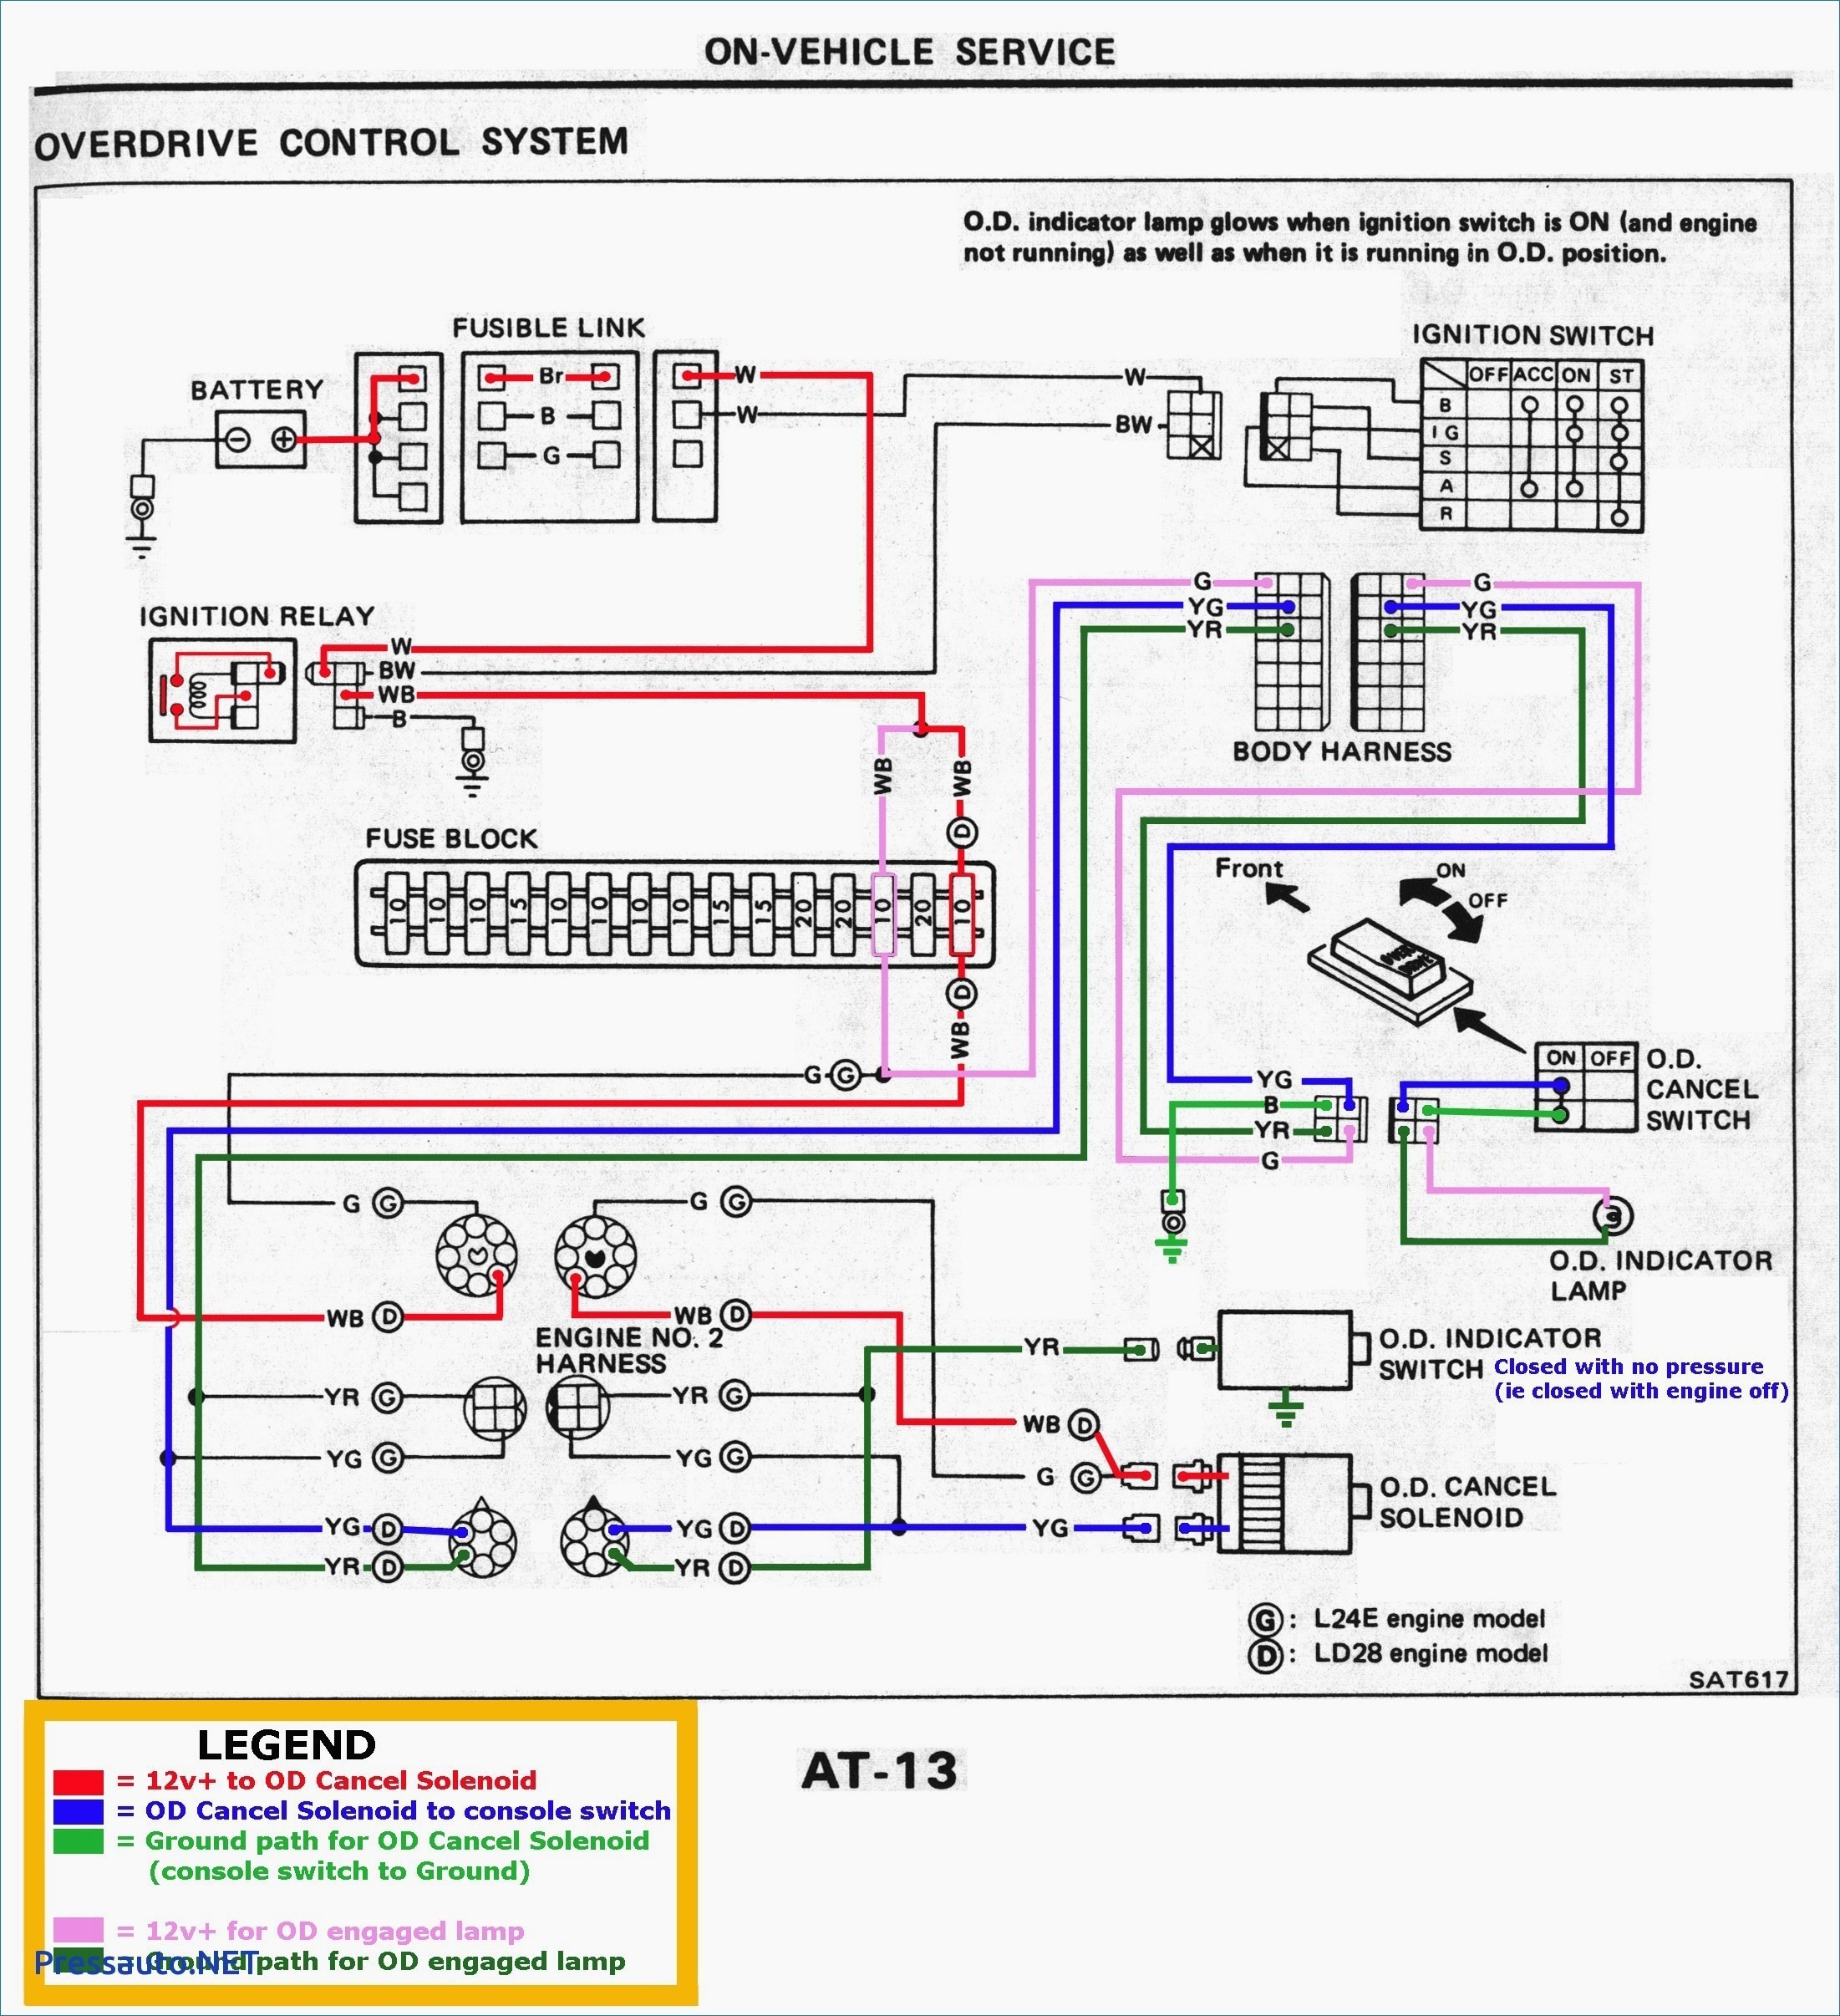 3400 Sfi Engine Cooling System Diagram Chevy Impala 3 4 Engine Diagram Of 3400 Sfi Engine Cooling System Diagram